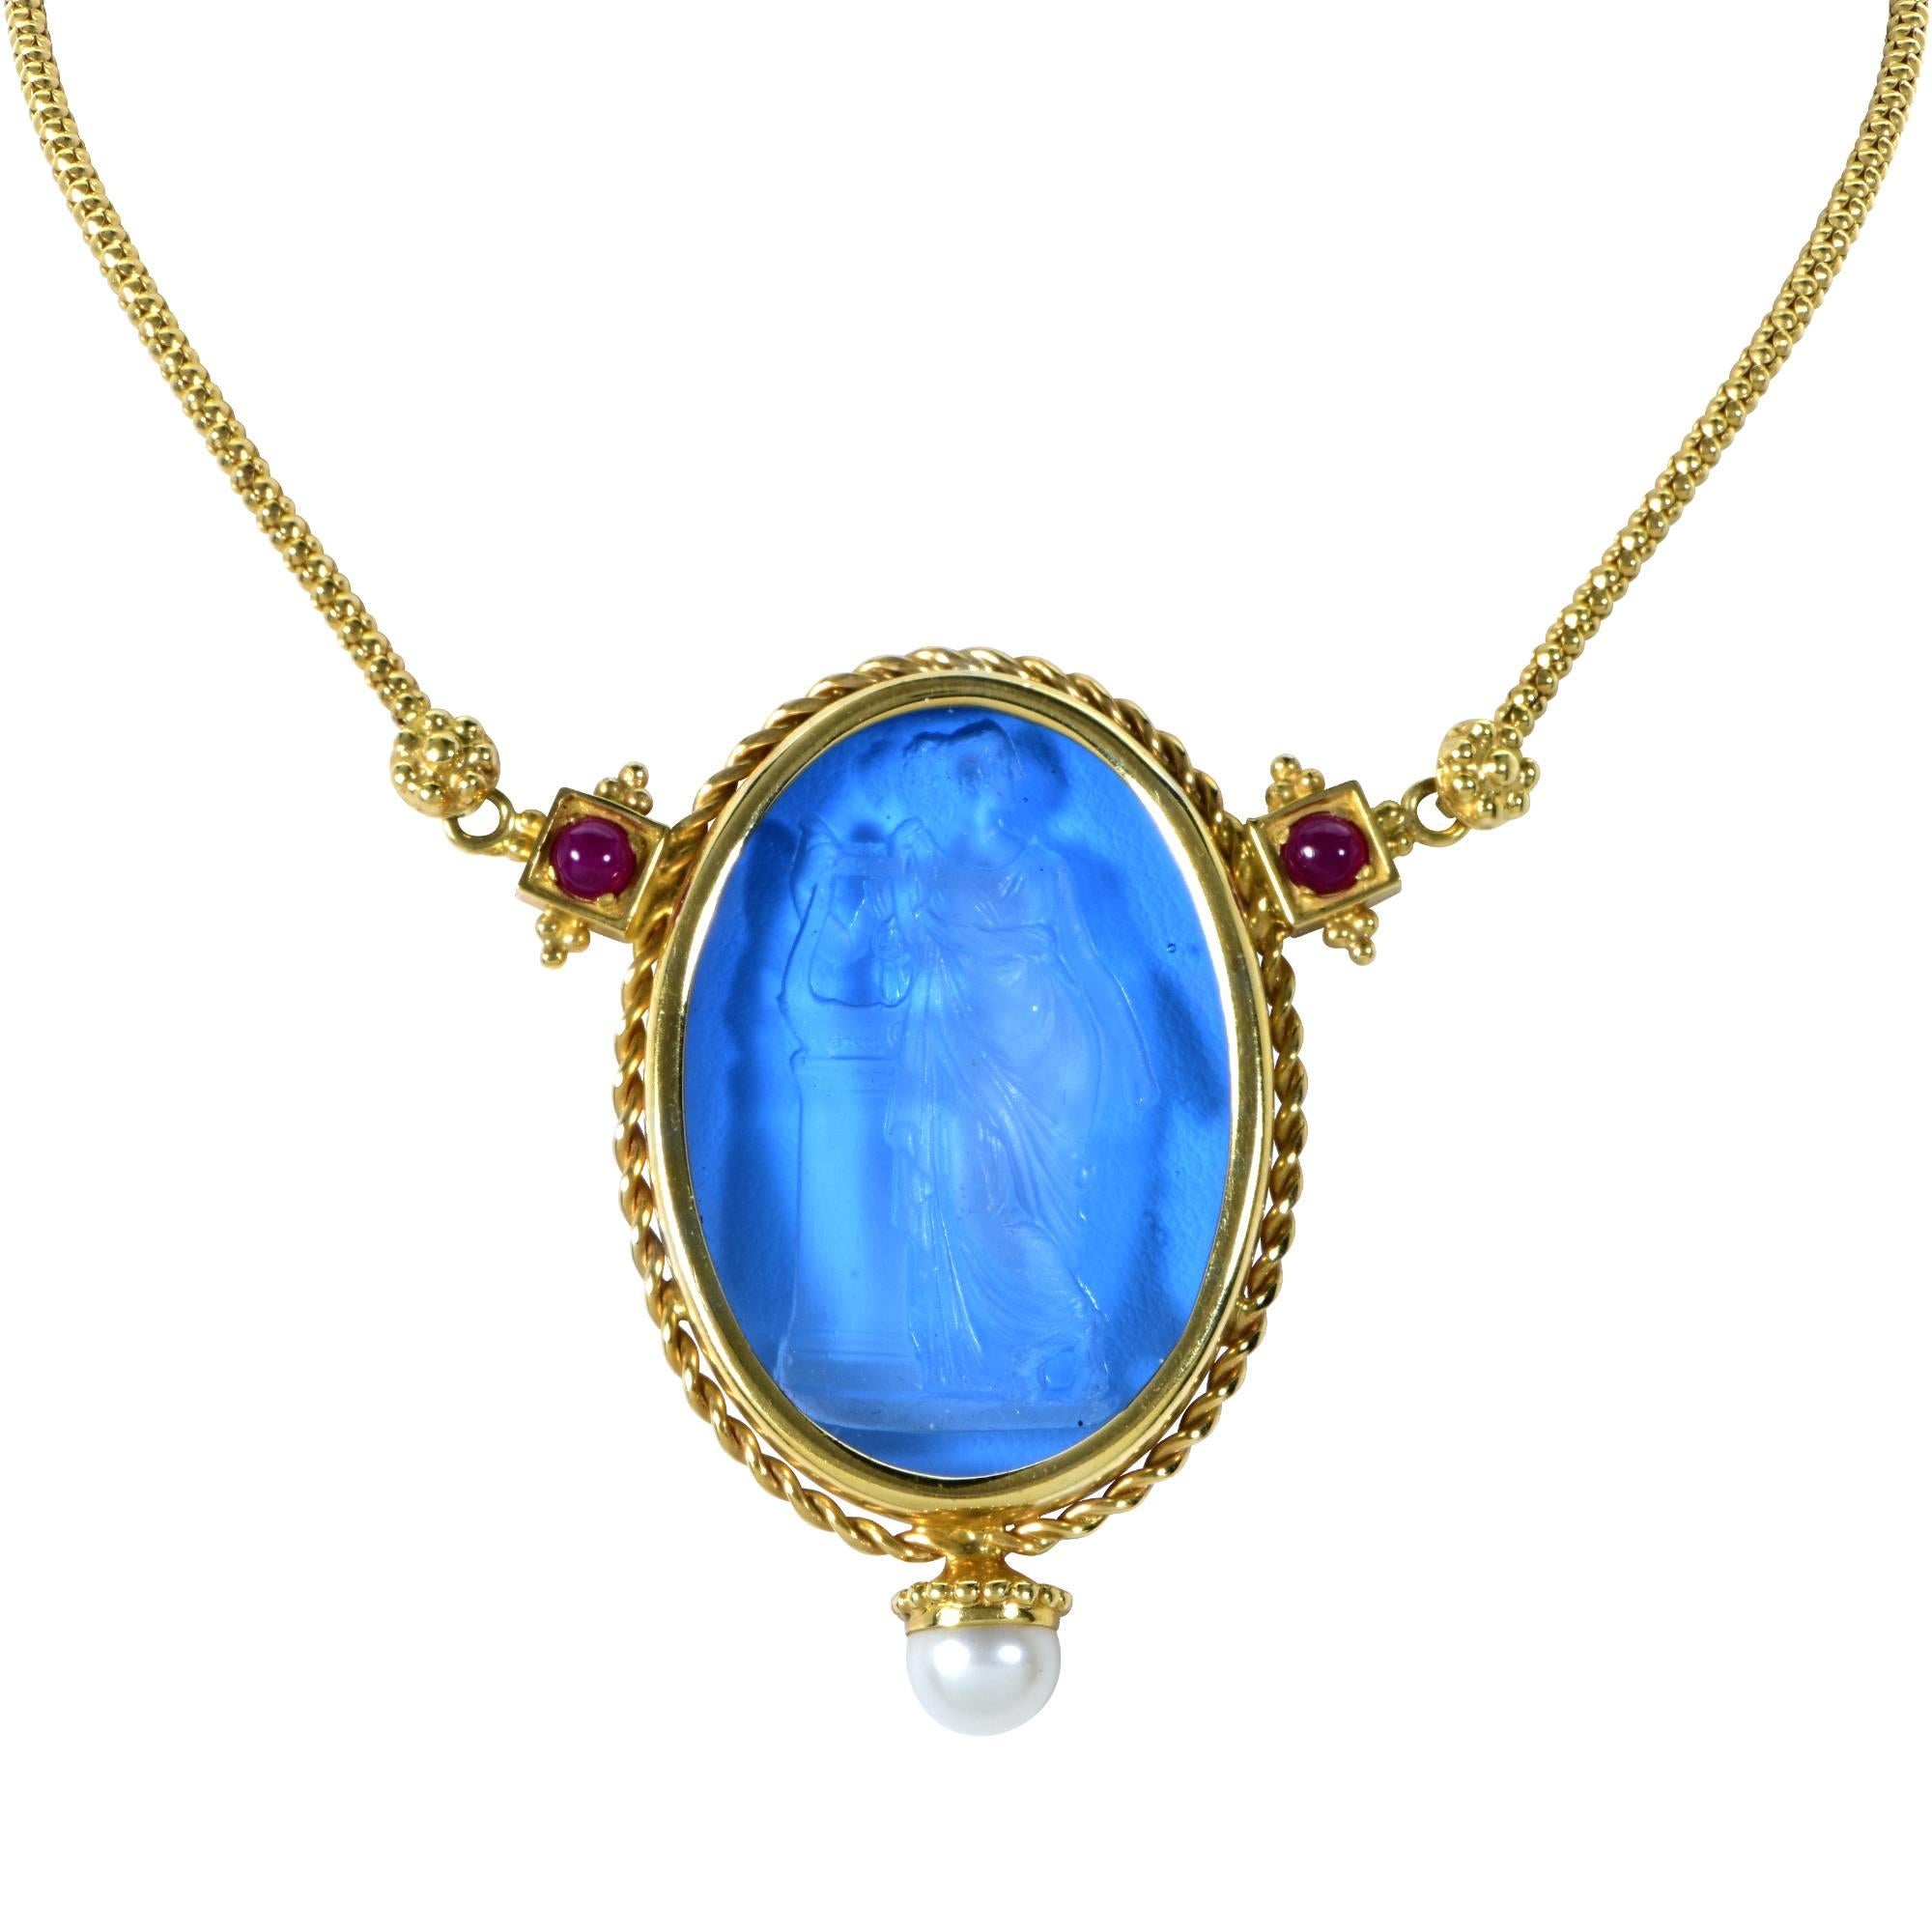 14k yellow gold necklace featuring a Venetian glass carving accented by pearls and rubies.

Measurements are available upon request.
It is stamped and/or tested as 18k gold.
The metal weight is 25.89 grams.

Our pieces are all accompanied by an